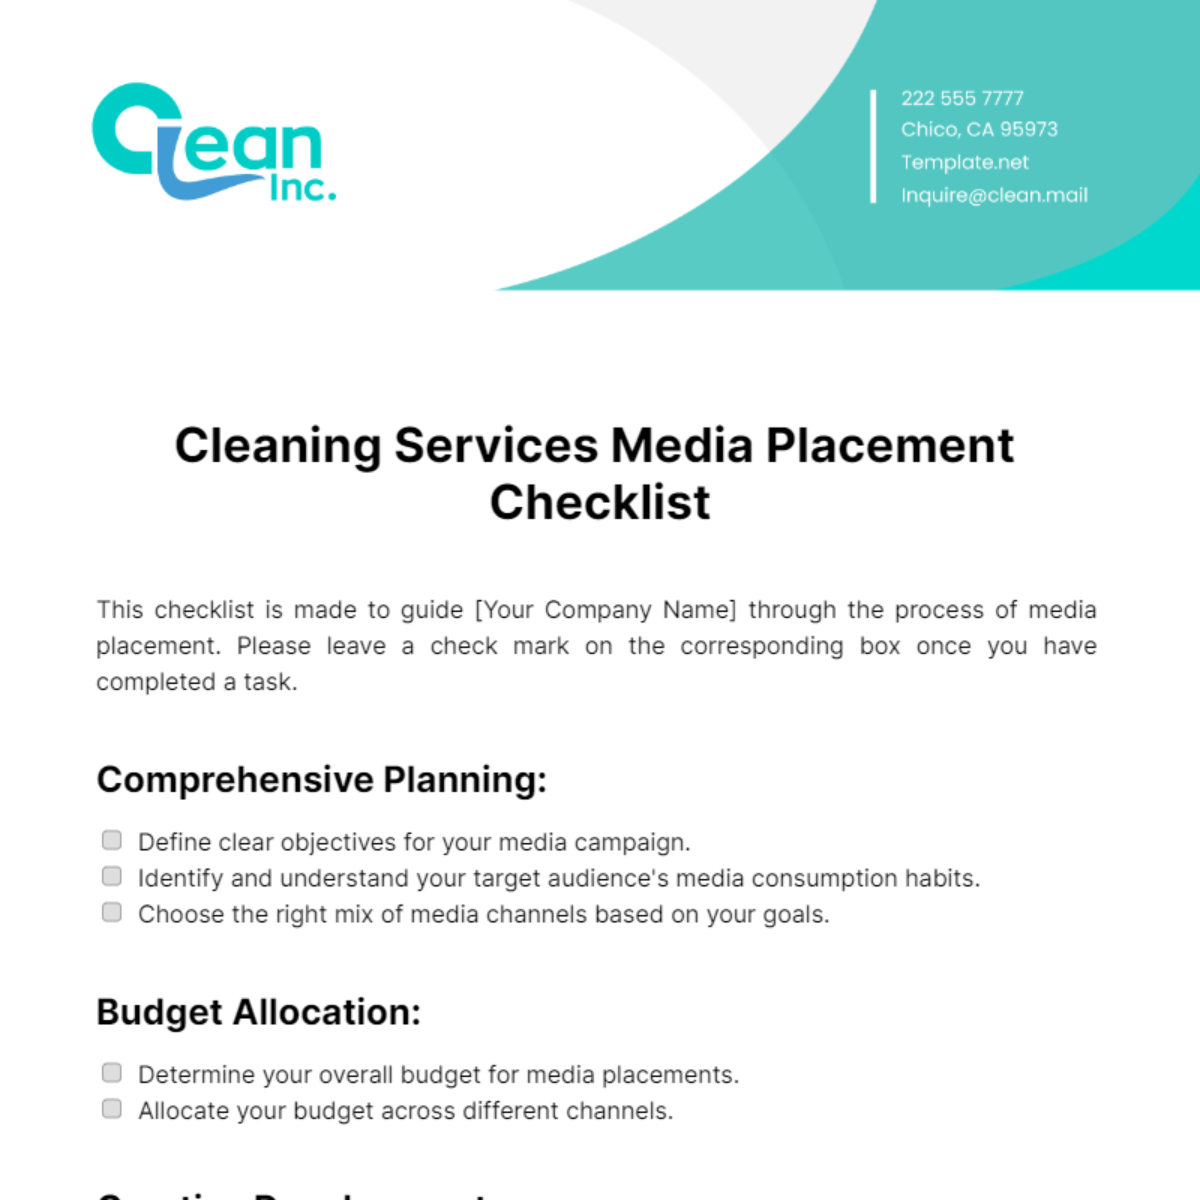 Cleaning Services Media Placement Checklist Template